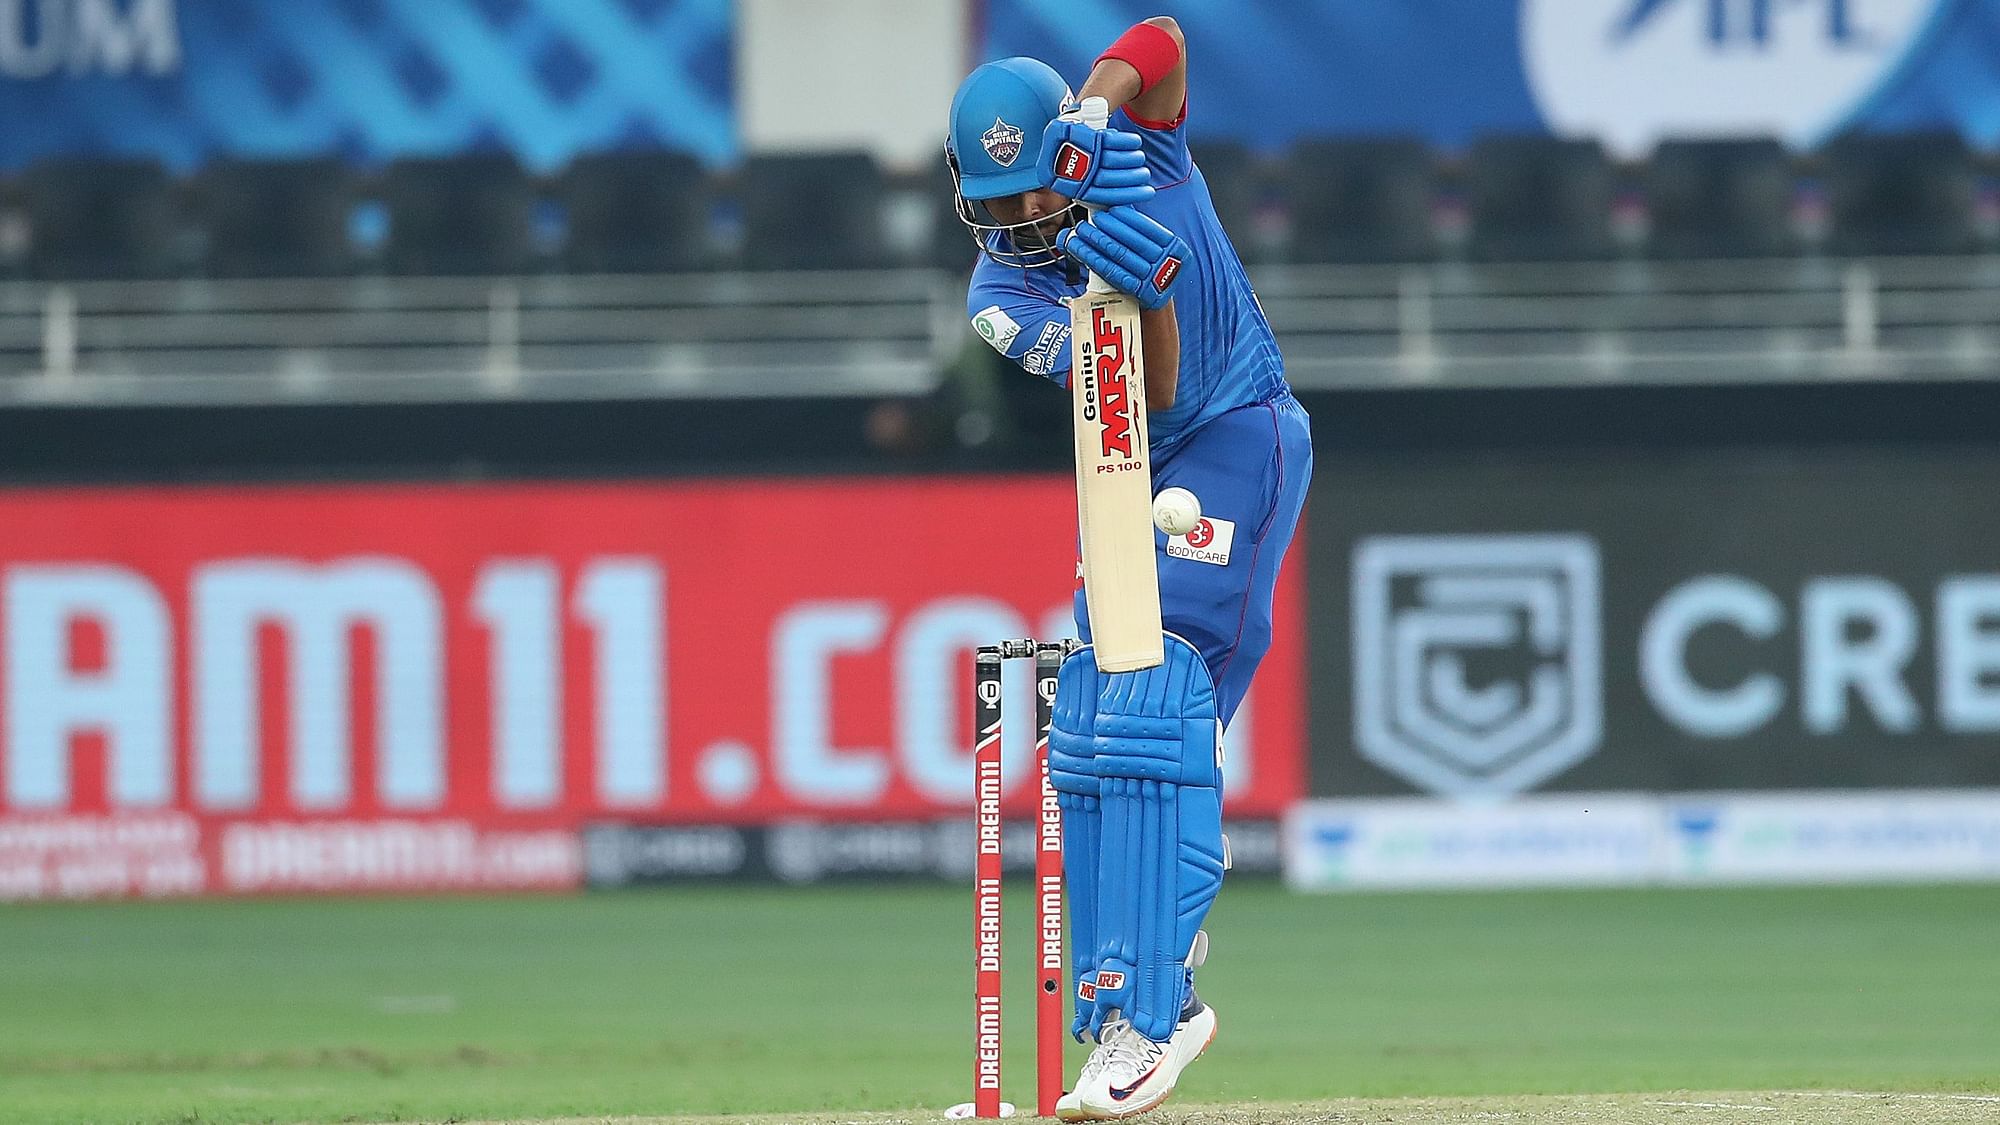 Prithvi Shaw, who hasn’t been in his best form playing for Delhi Capitals, gets criticized again for playing an irresponsible shot